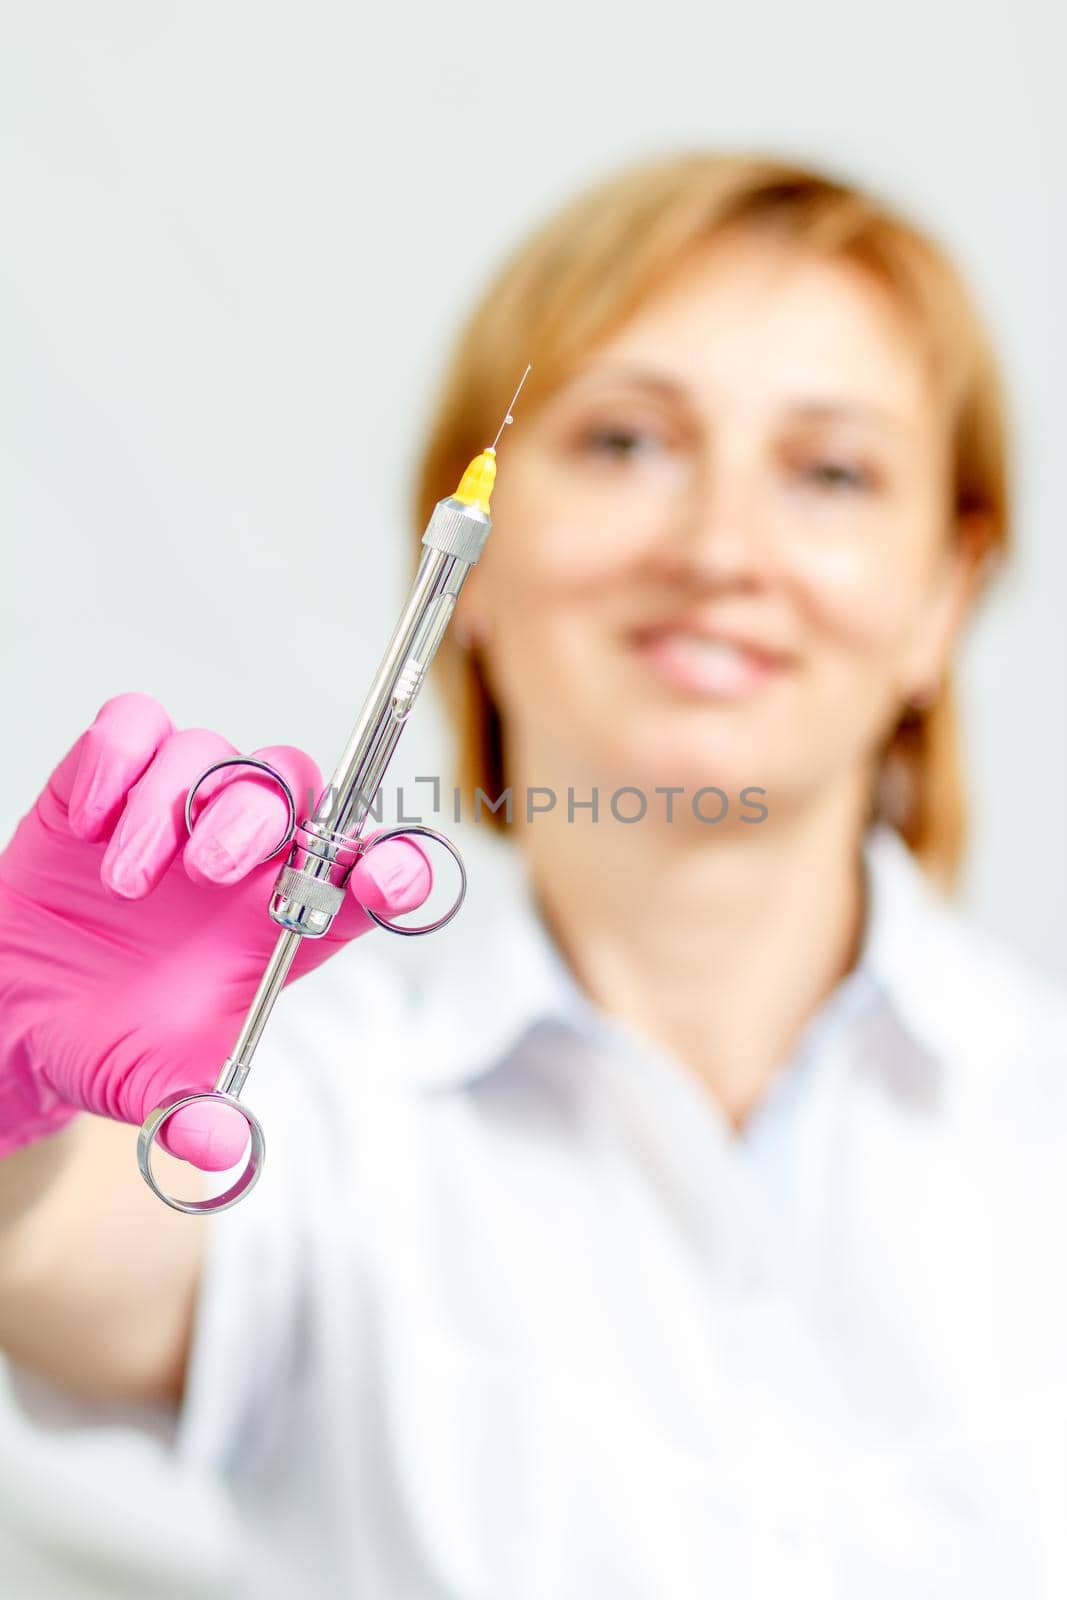 Smiling female doctor in pink glove holding syringe with anesthetic and needle. Selective focus on syringe